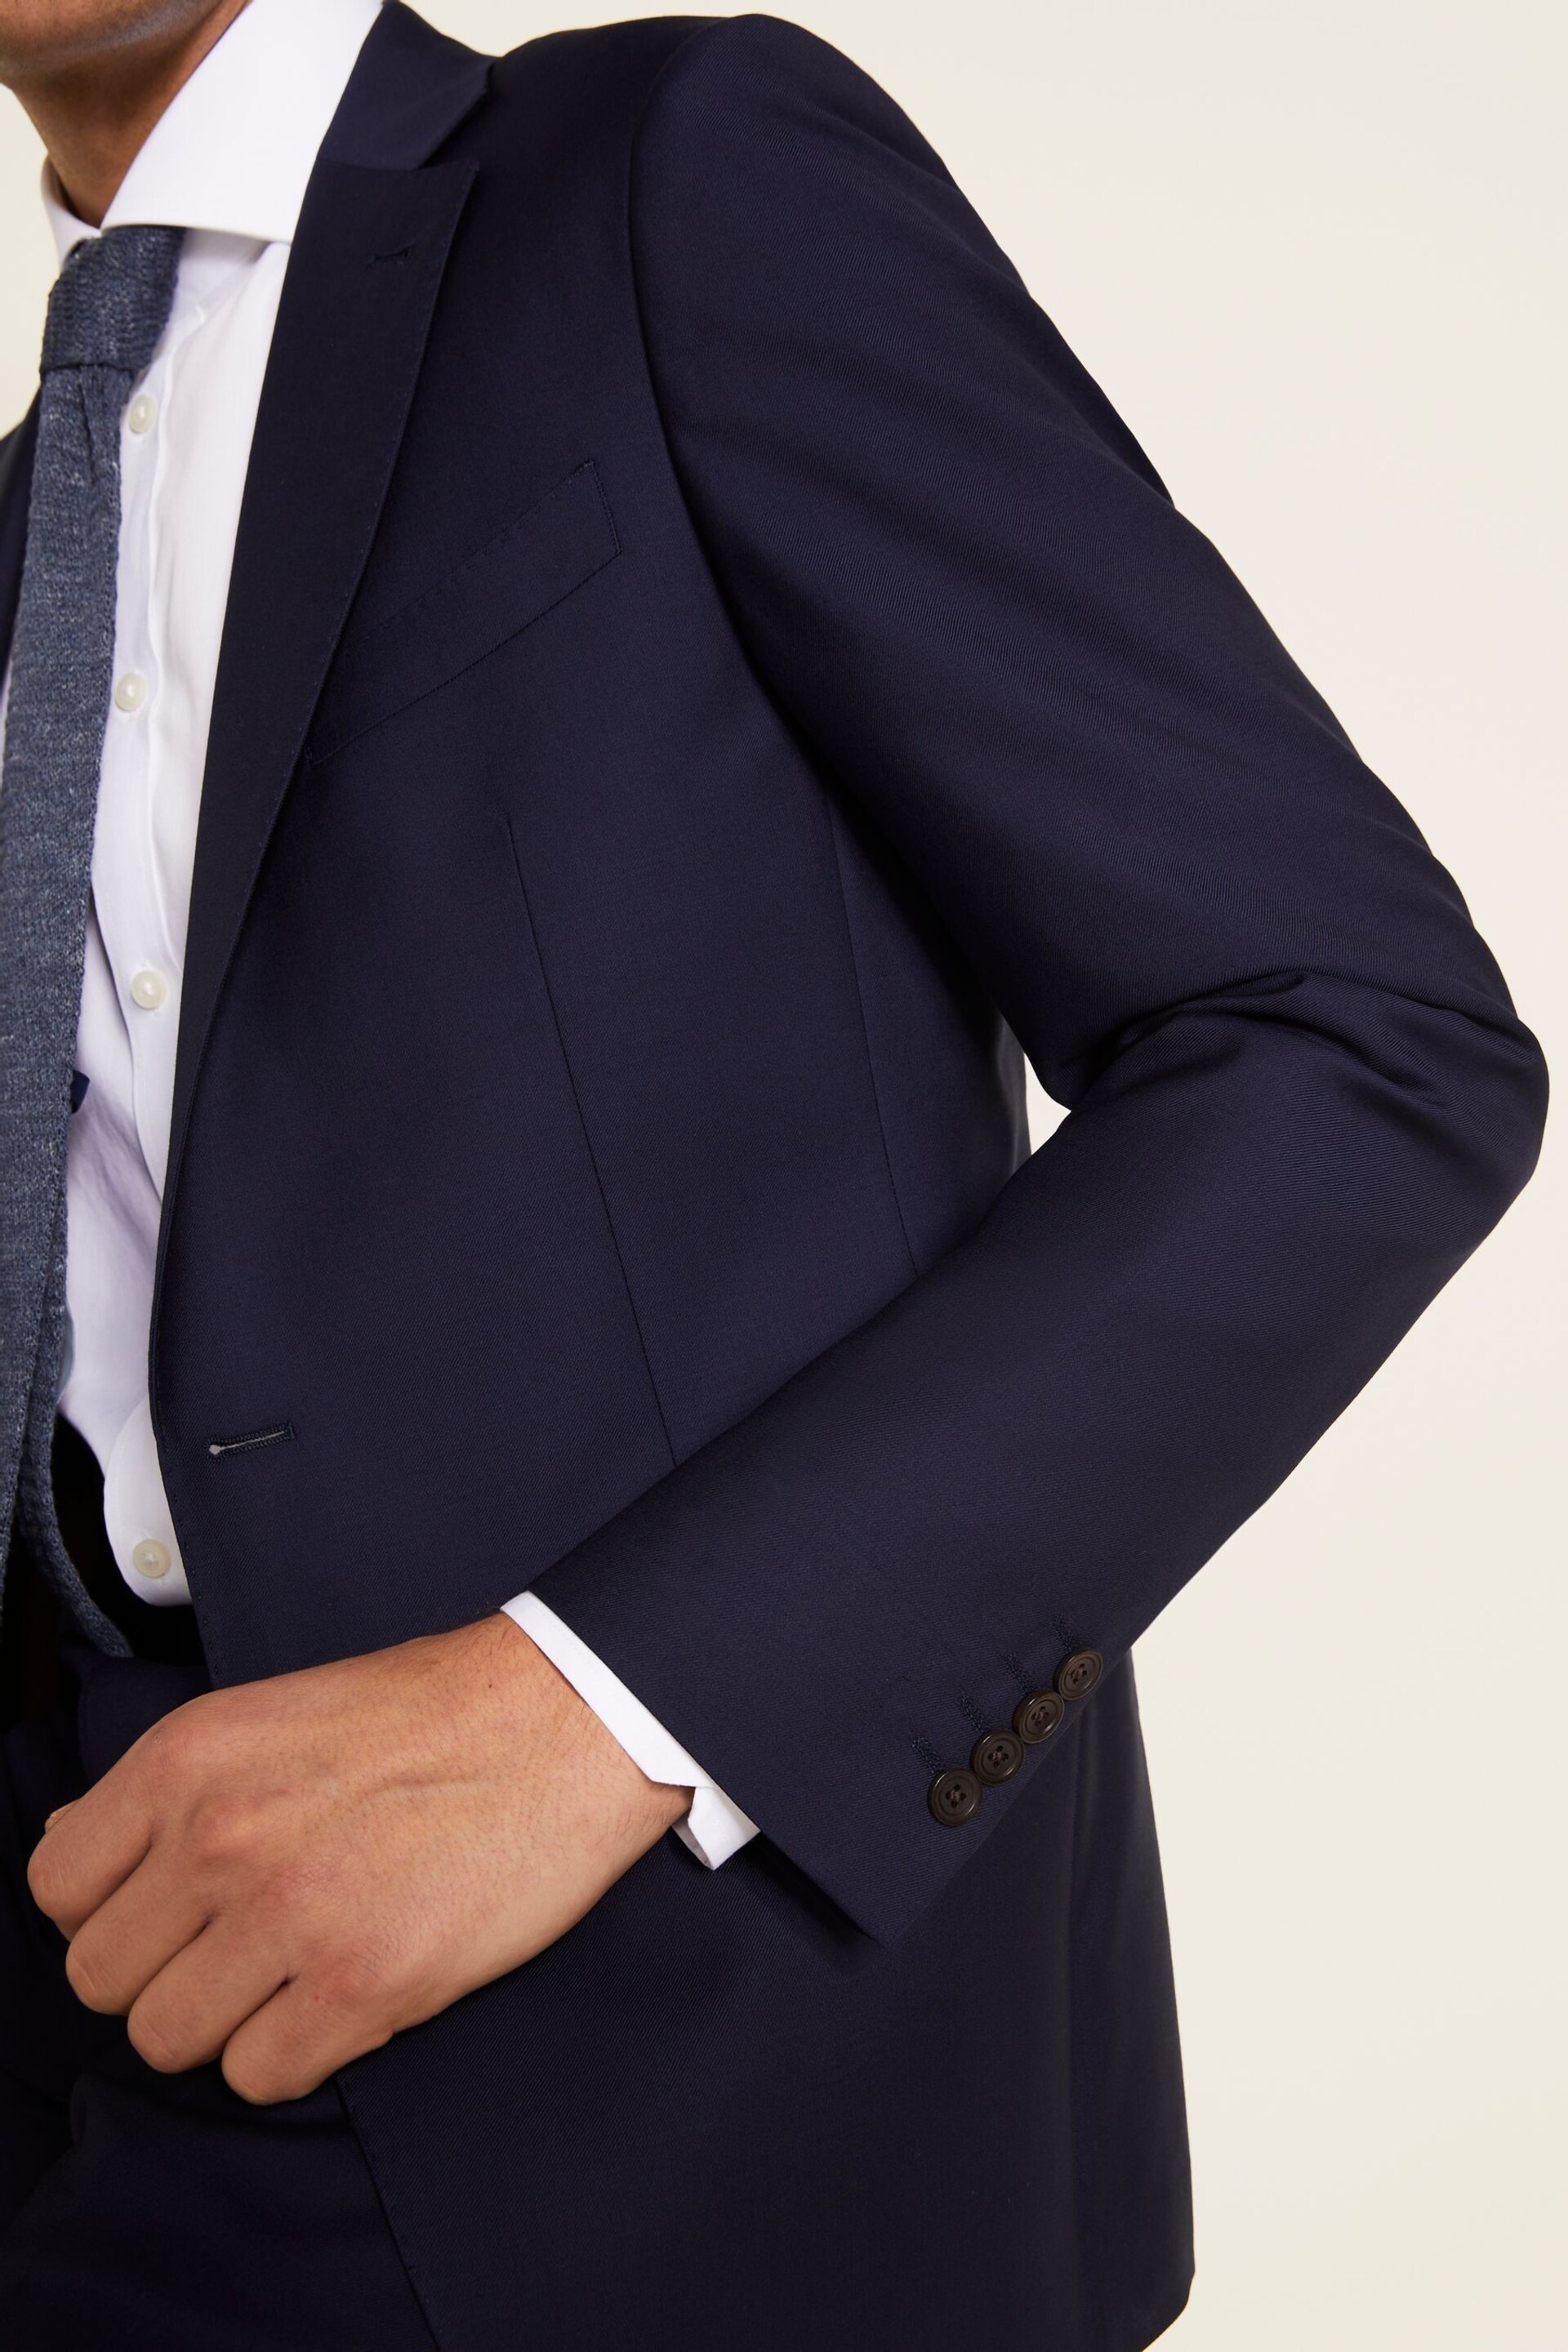 MOSS x Zenga Blue Tailored Fit Naples Jacket - Image 5 of 9